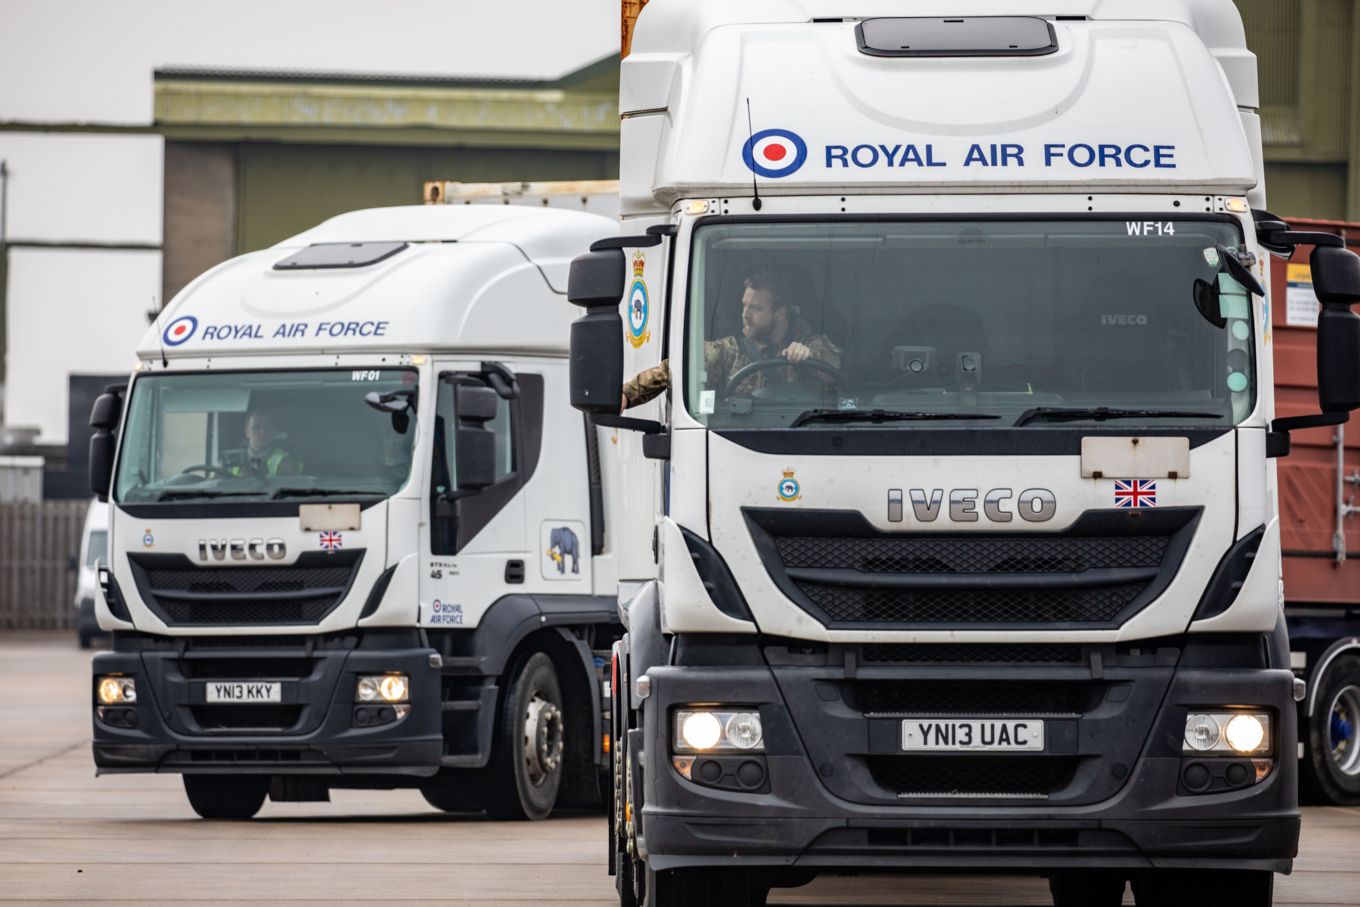 2MT Squadron rolls out from RAF Wittering for NATO Black Sea Air Policing in March 2021